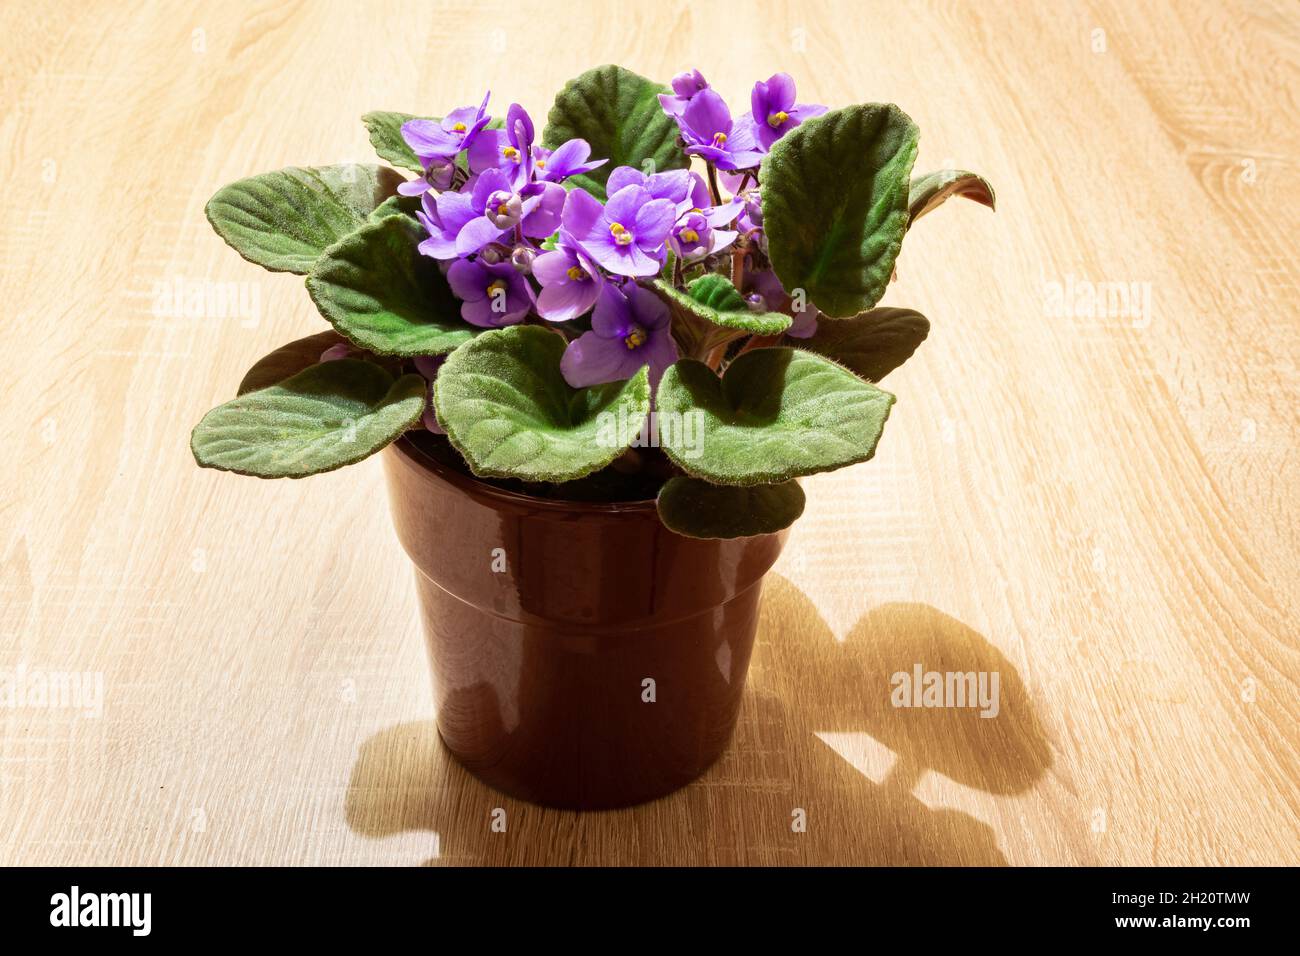 Violet colored flowers of African violets (Saintpaulia ionantha) in a flowerpot Stock Photo